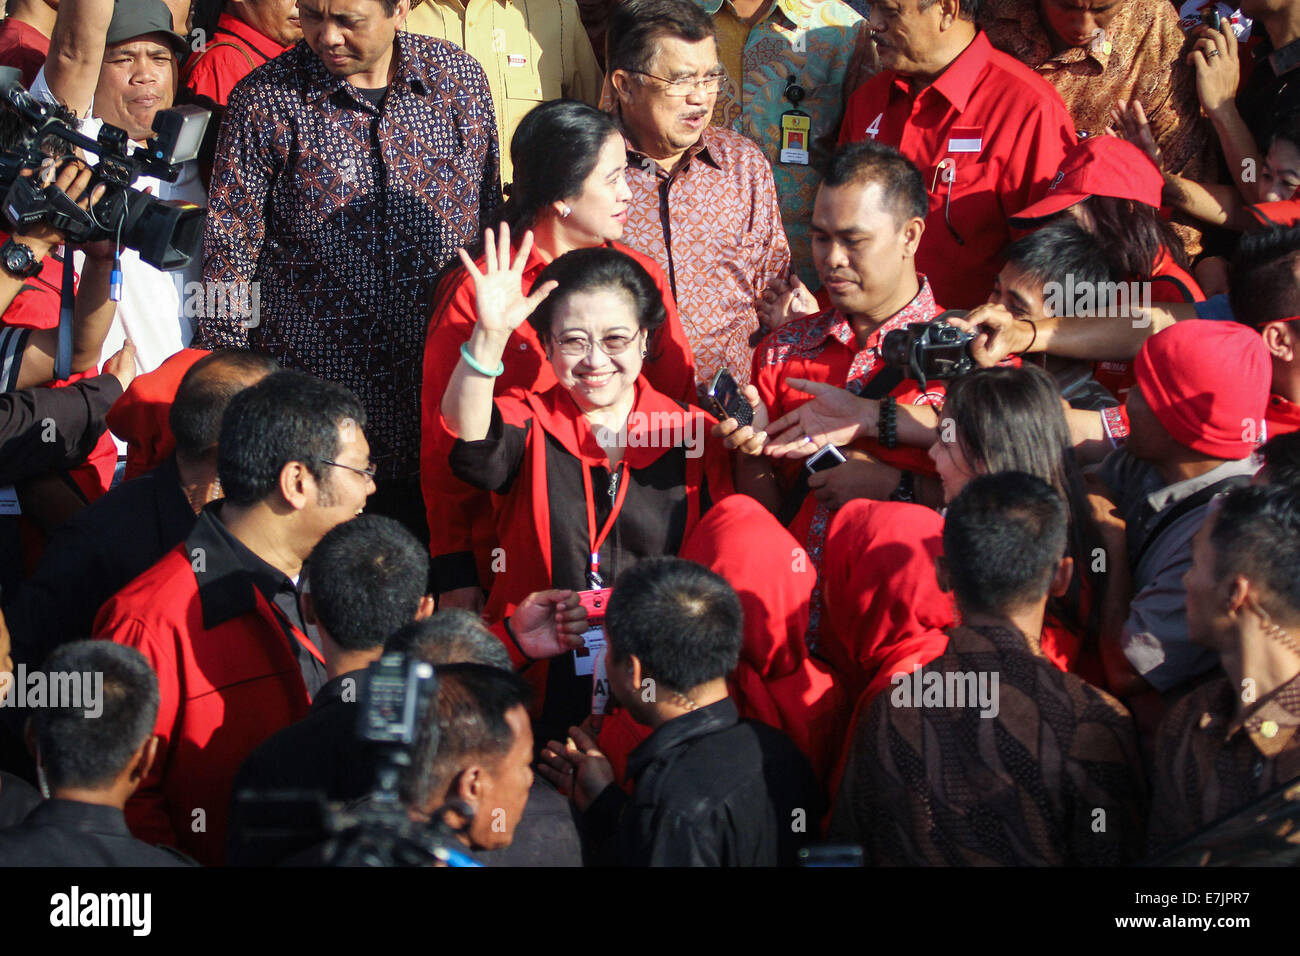 Semarang, Indonesia. 19th September, 2014. Former president and chairperson of Indonesian Democratic Party of Struggle (PDI-P) Megawati Sukarnoputri waves her hand to supporters during the 4th national working meeting of PDI-P at Marina Convention Hall in Semarang, Central Java, Indonesia. The national meeting attended by 1,590 party cadres from all over Indonesia and take place from 19-21 September 2014. The meeting is expected to change the 10-year mindset of the PDI-P, as it has switched to being the ruling party from being the opposition party. Credit:  PACIFIC PRESS/Alamy Live News Stock Photo